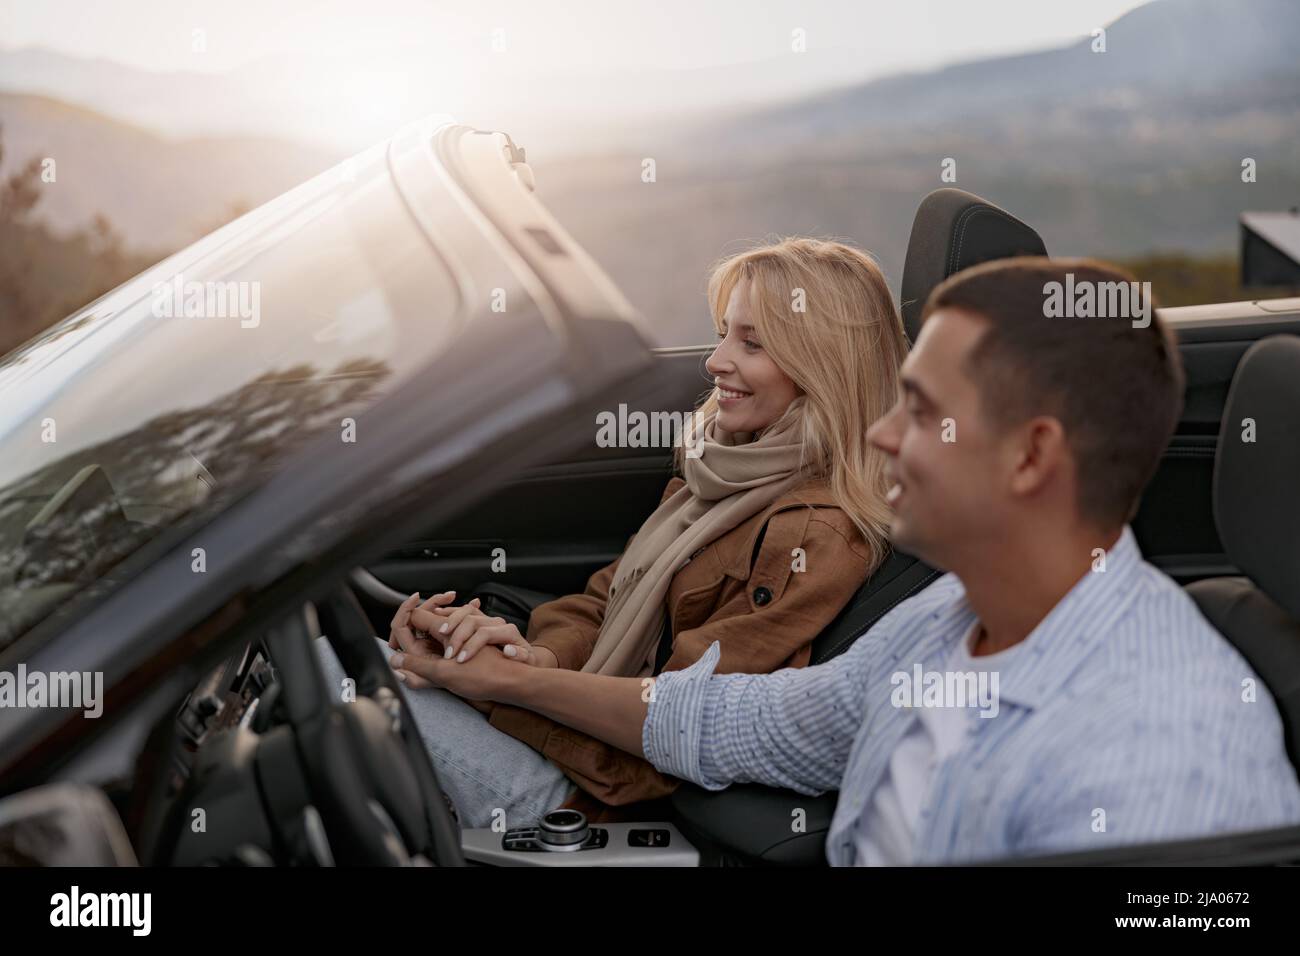 Cheerful pretty blond female smiling and holding hands with boyfriend in a convertible car Stock Photo